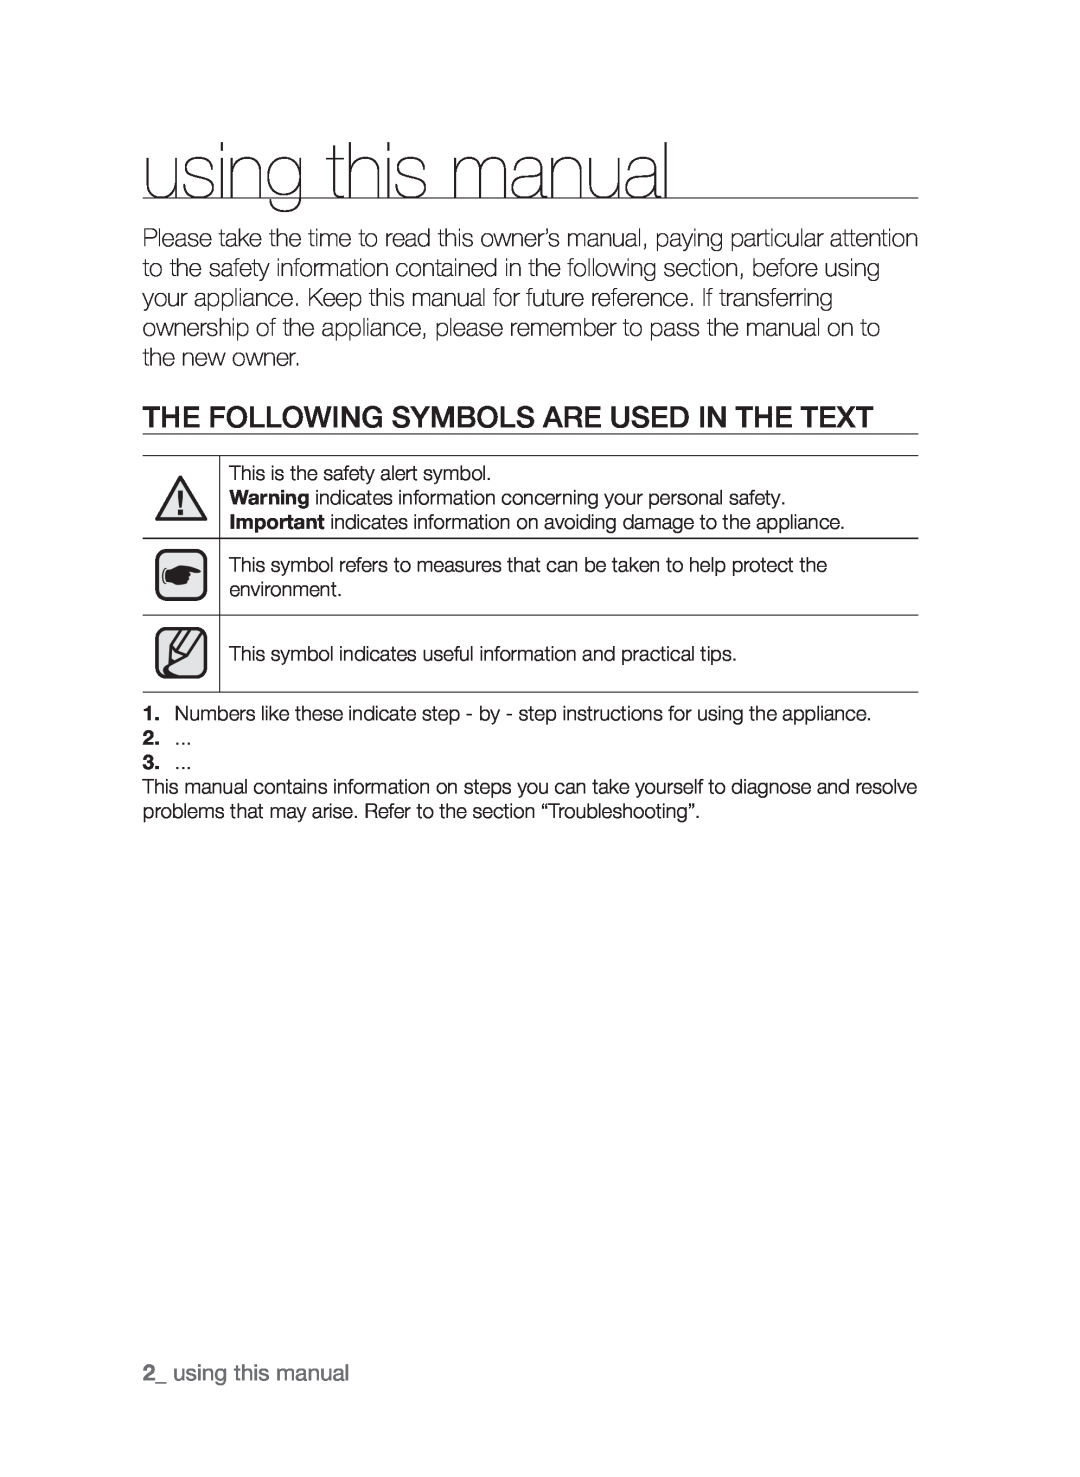 Samsung CTI613GI user manual using this manual, The following symbols are used in the text 